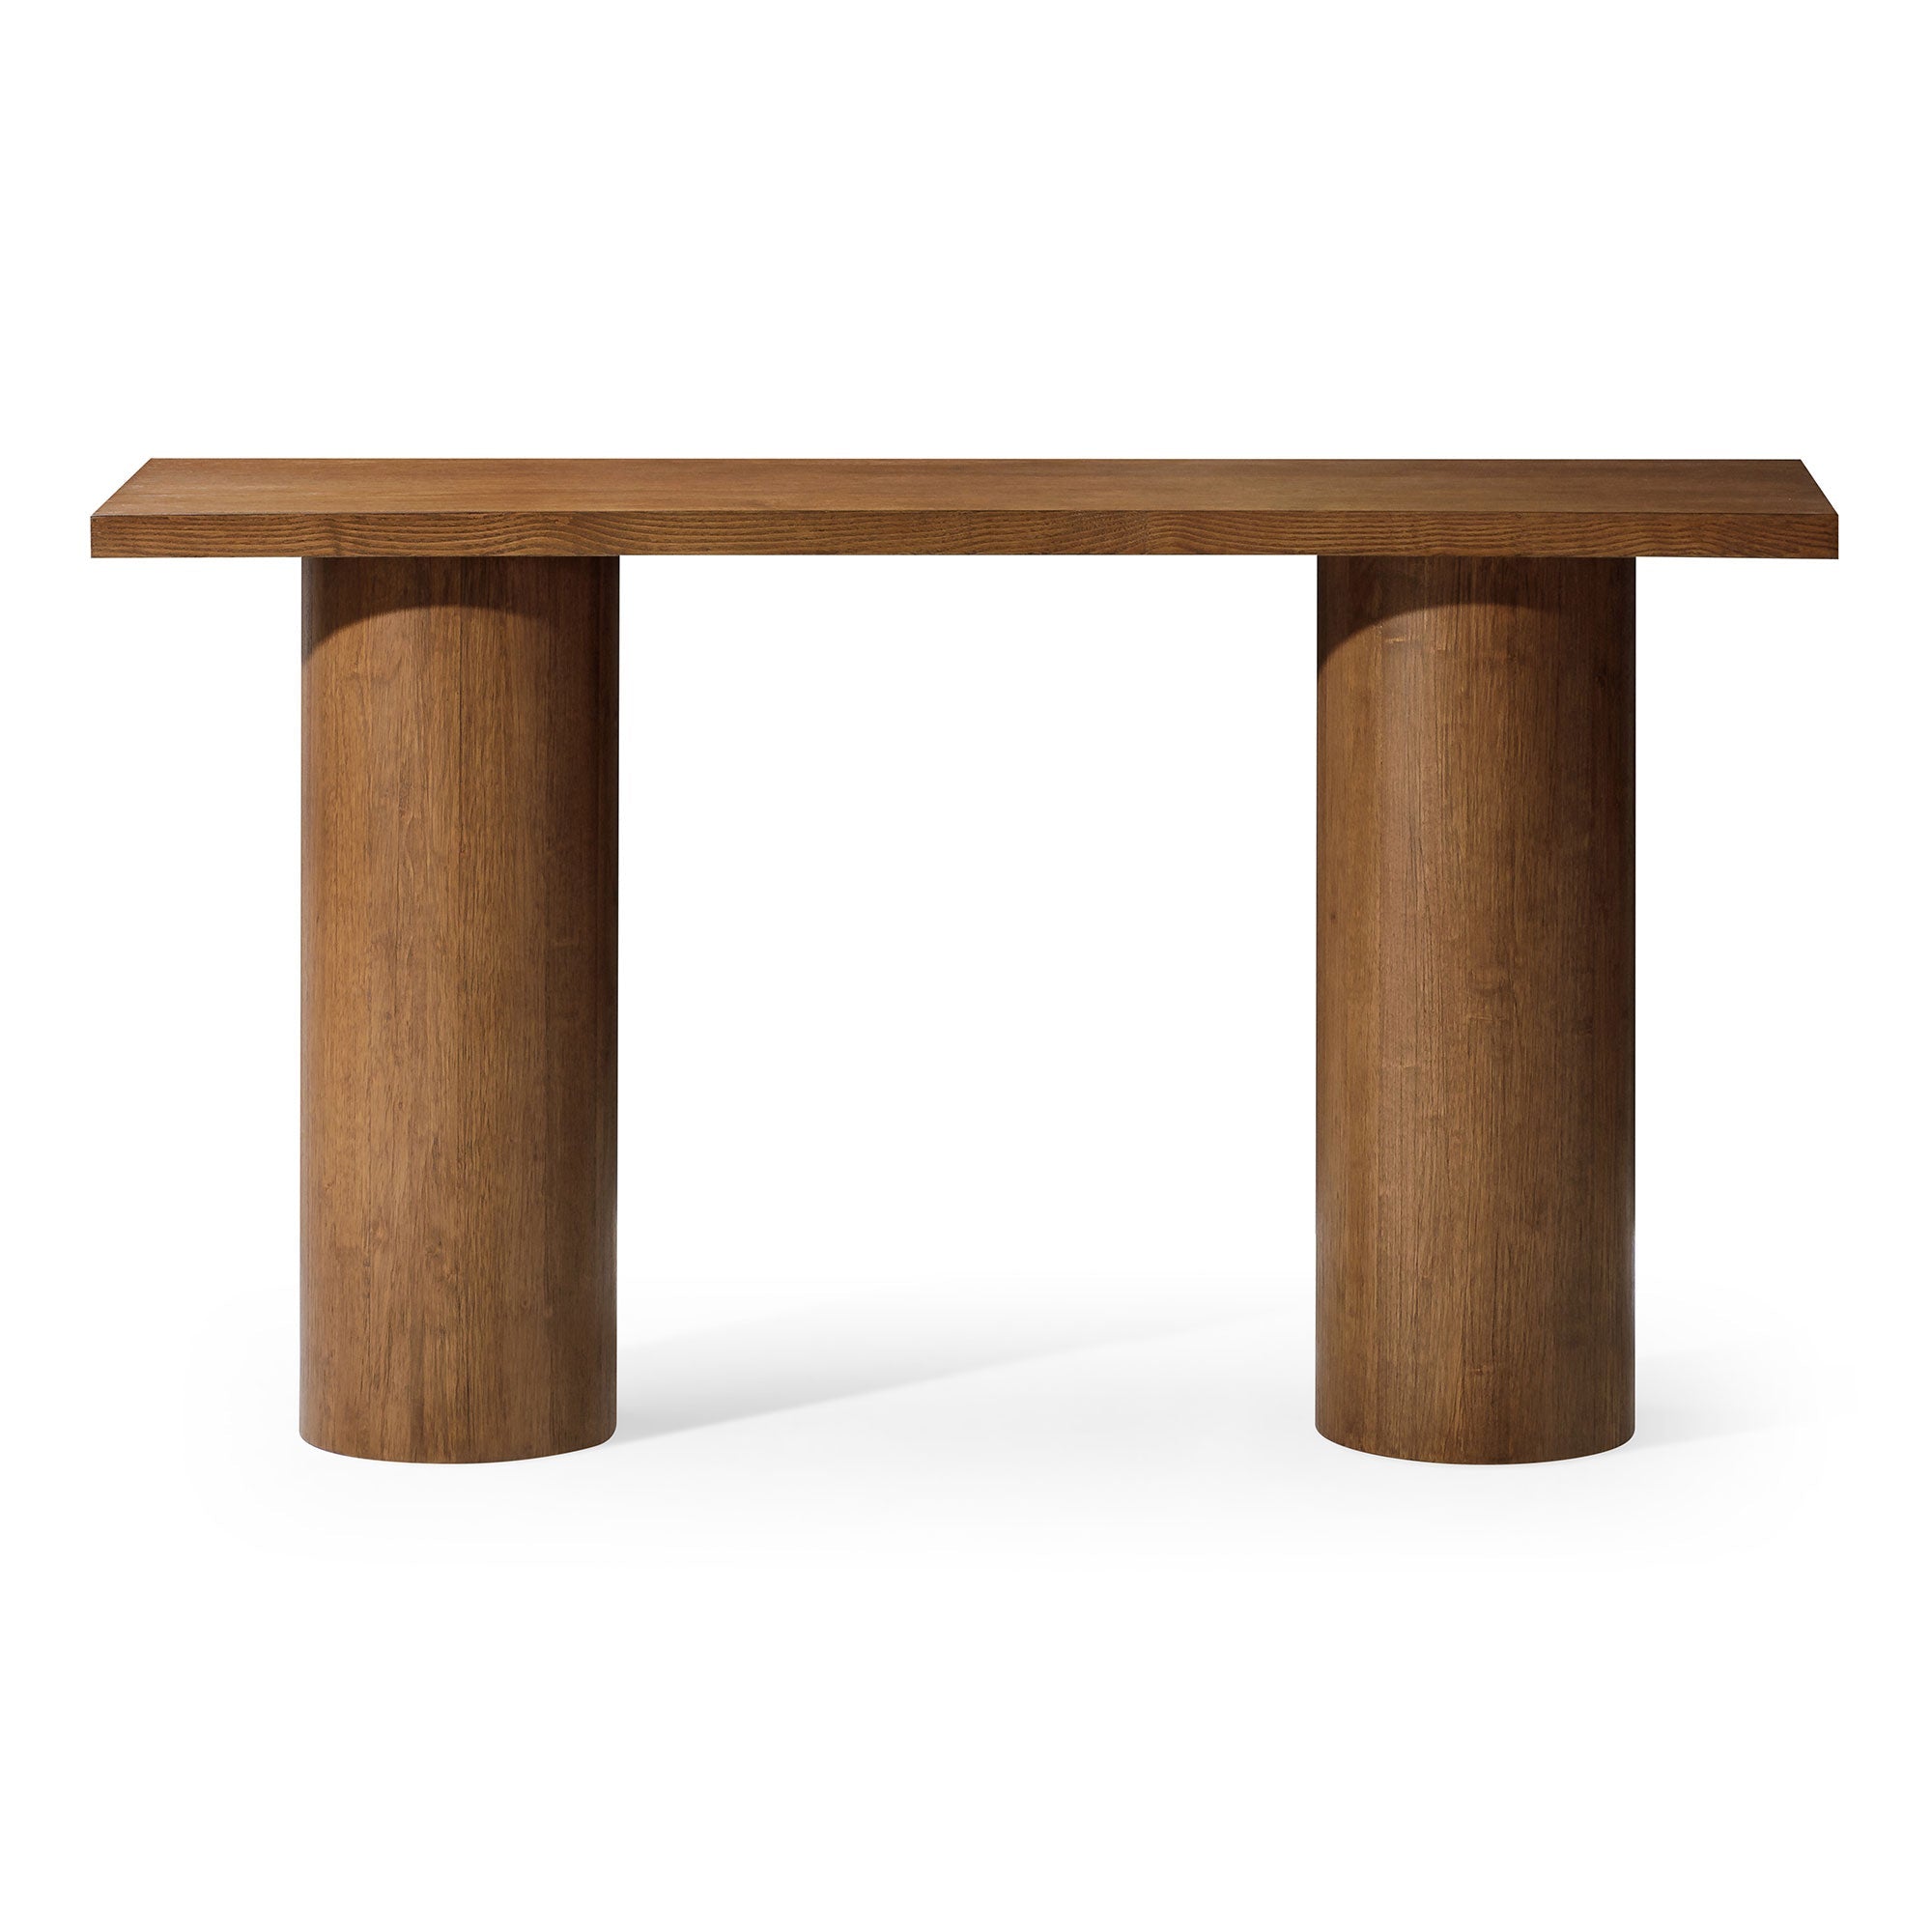 Lana Contemporary Wooden Console Table in Refined Brown Finish in Accent Tables by Maven Lane